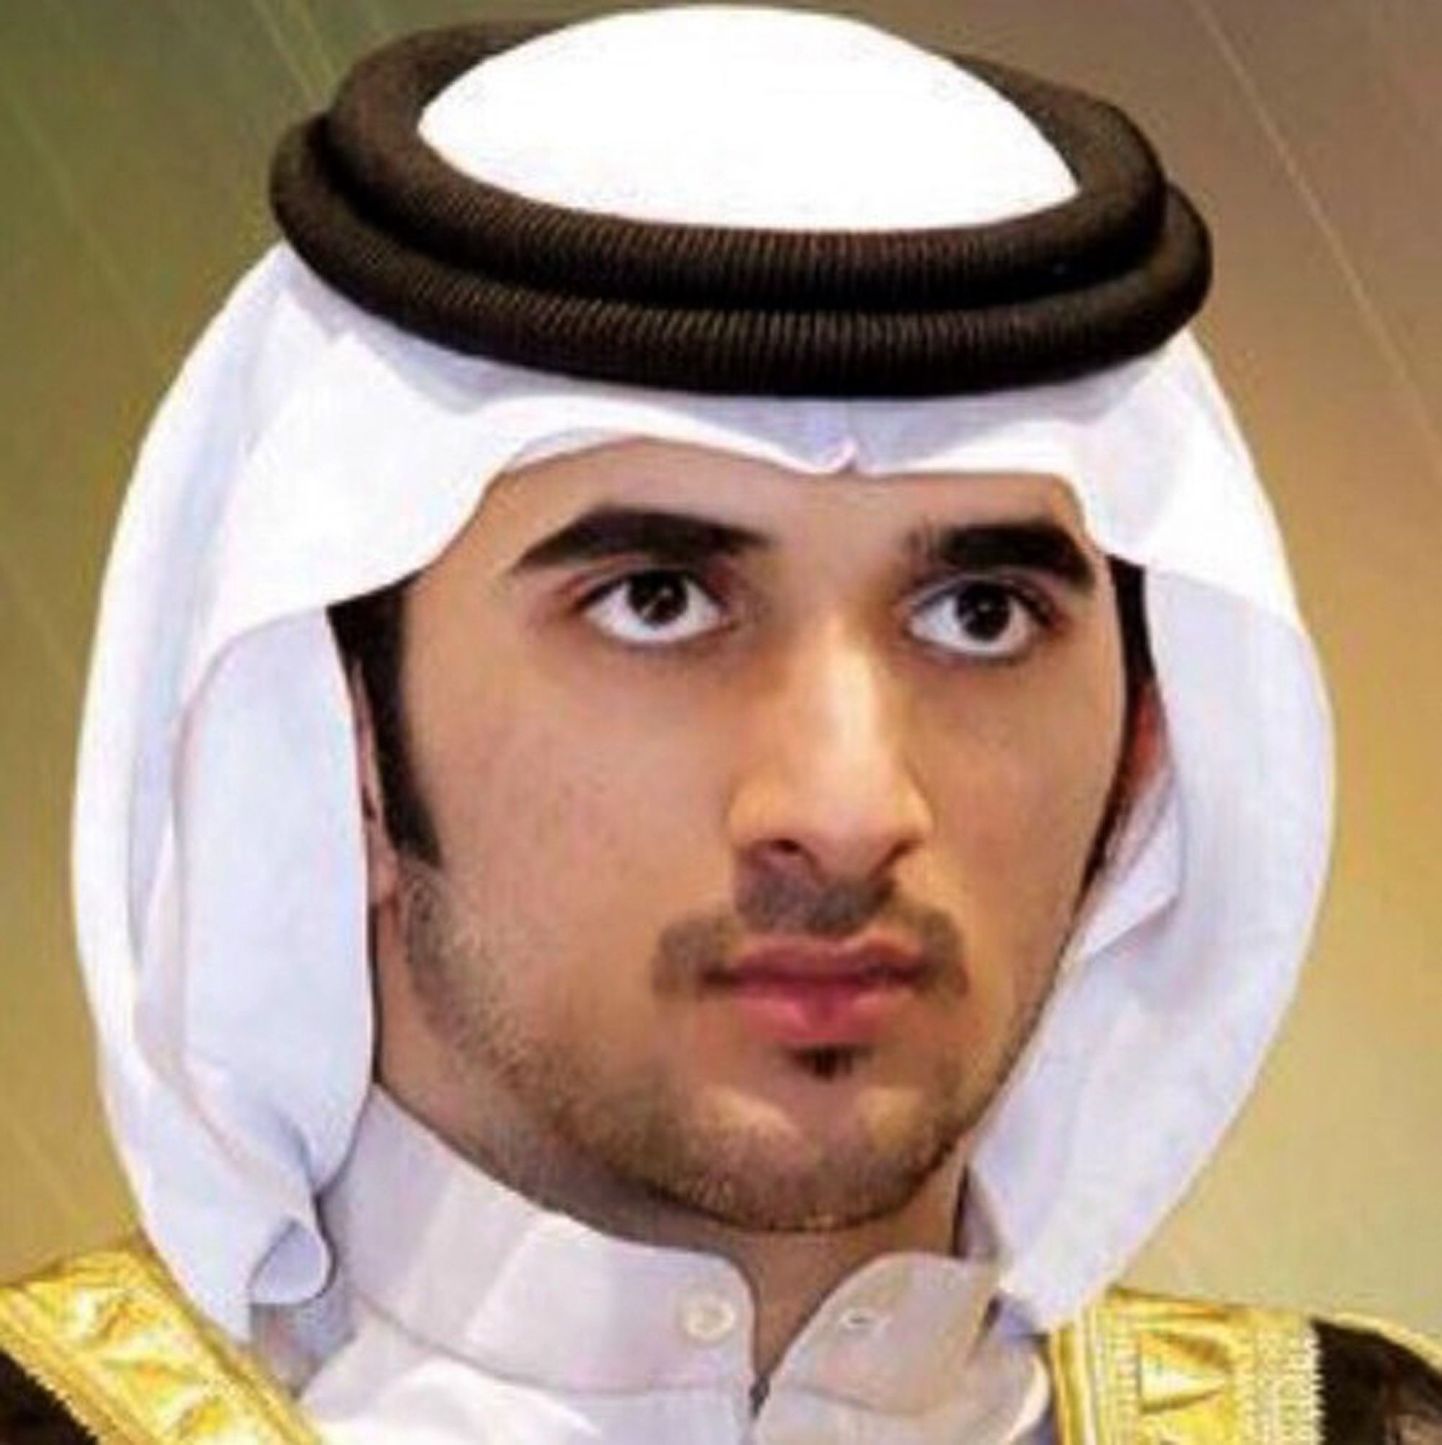 This undated photo made available by Emirates News Agency, WAM, shows late Sheikh Rashid bin Mohammed bin Rashid Al Maktoum, a son of Dubai's ruler and elder brother to the emirate's heir apparent. The United Arab Emirates state news agency WAM said Saturday, Sept. 19, 2015, that Sheikh Rashid died of a heart attack at age 33. (WAM via AP)